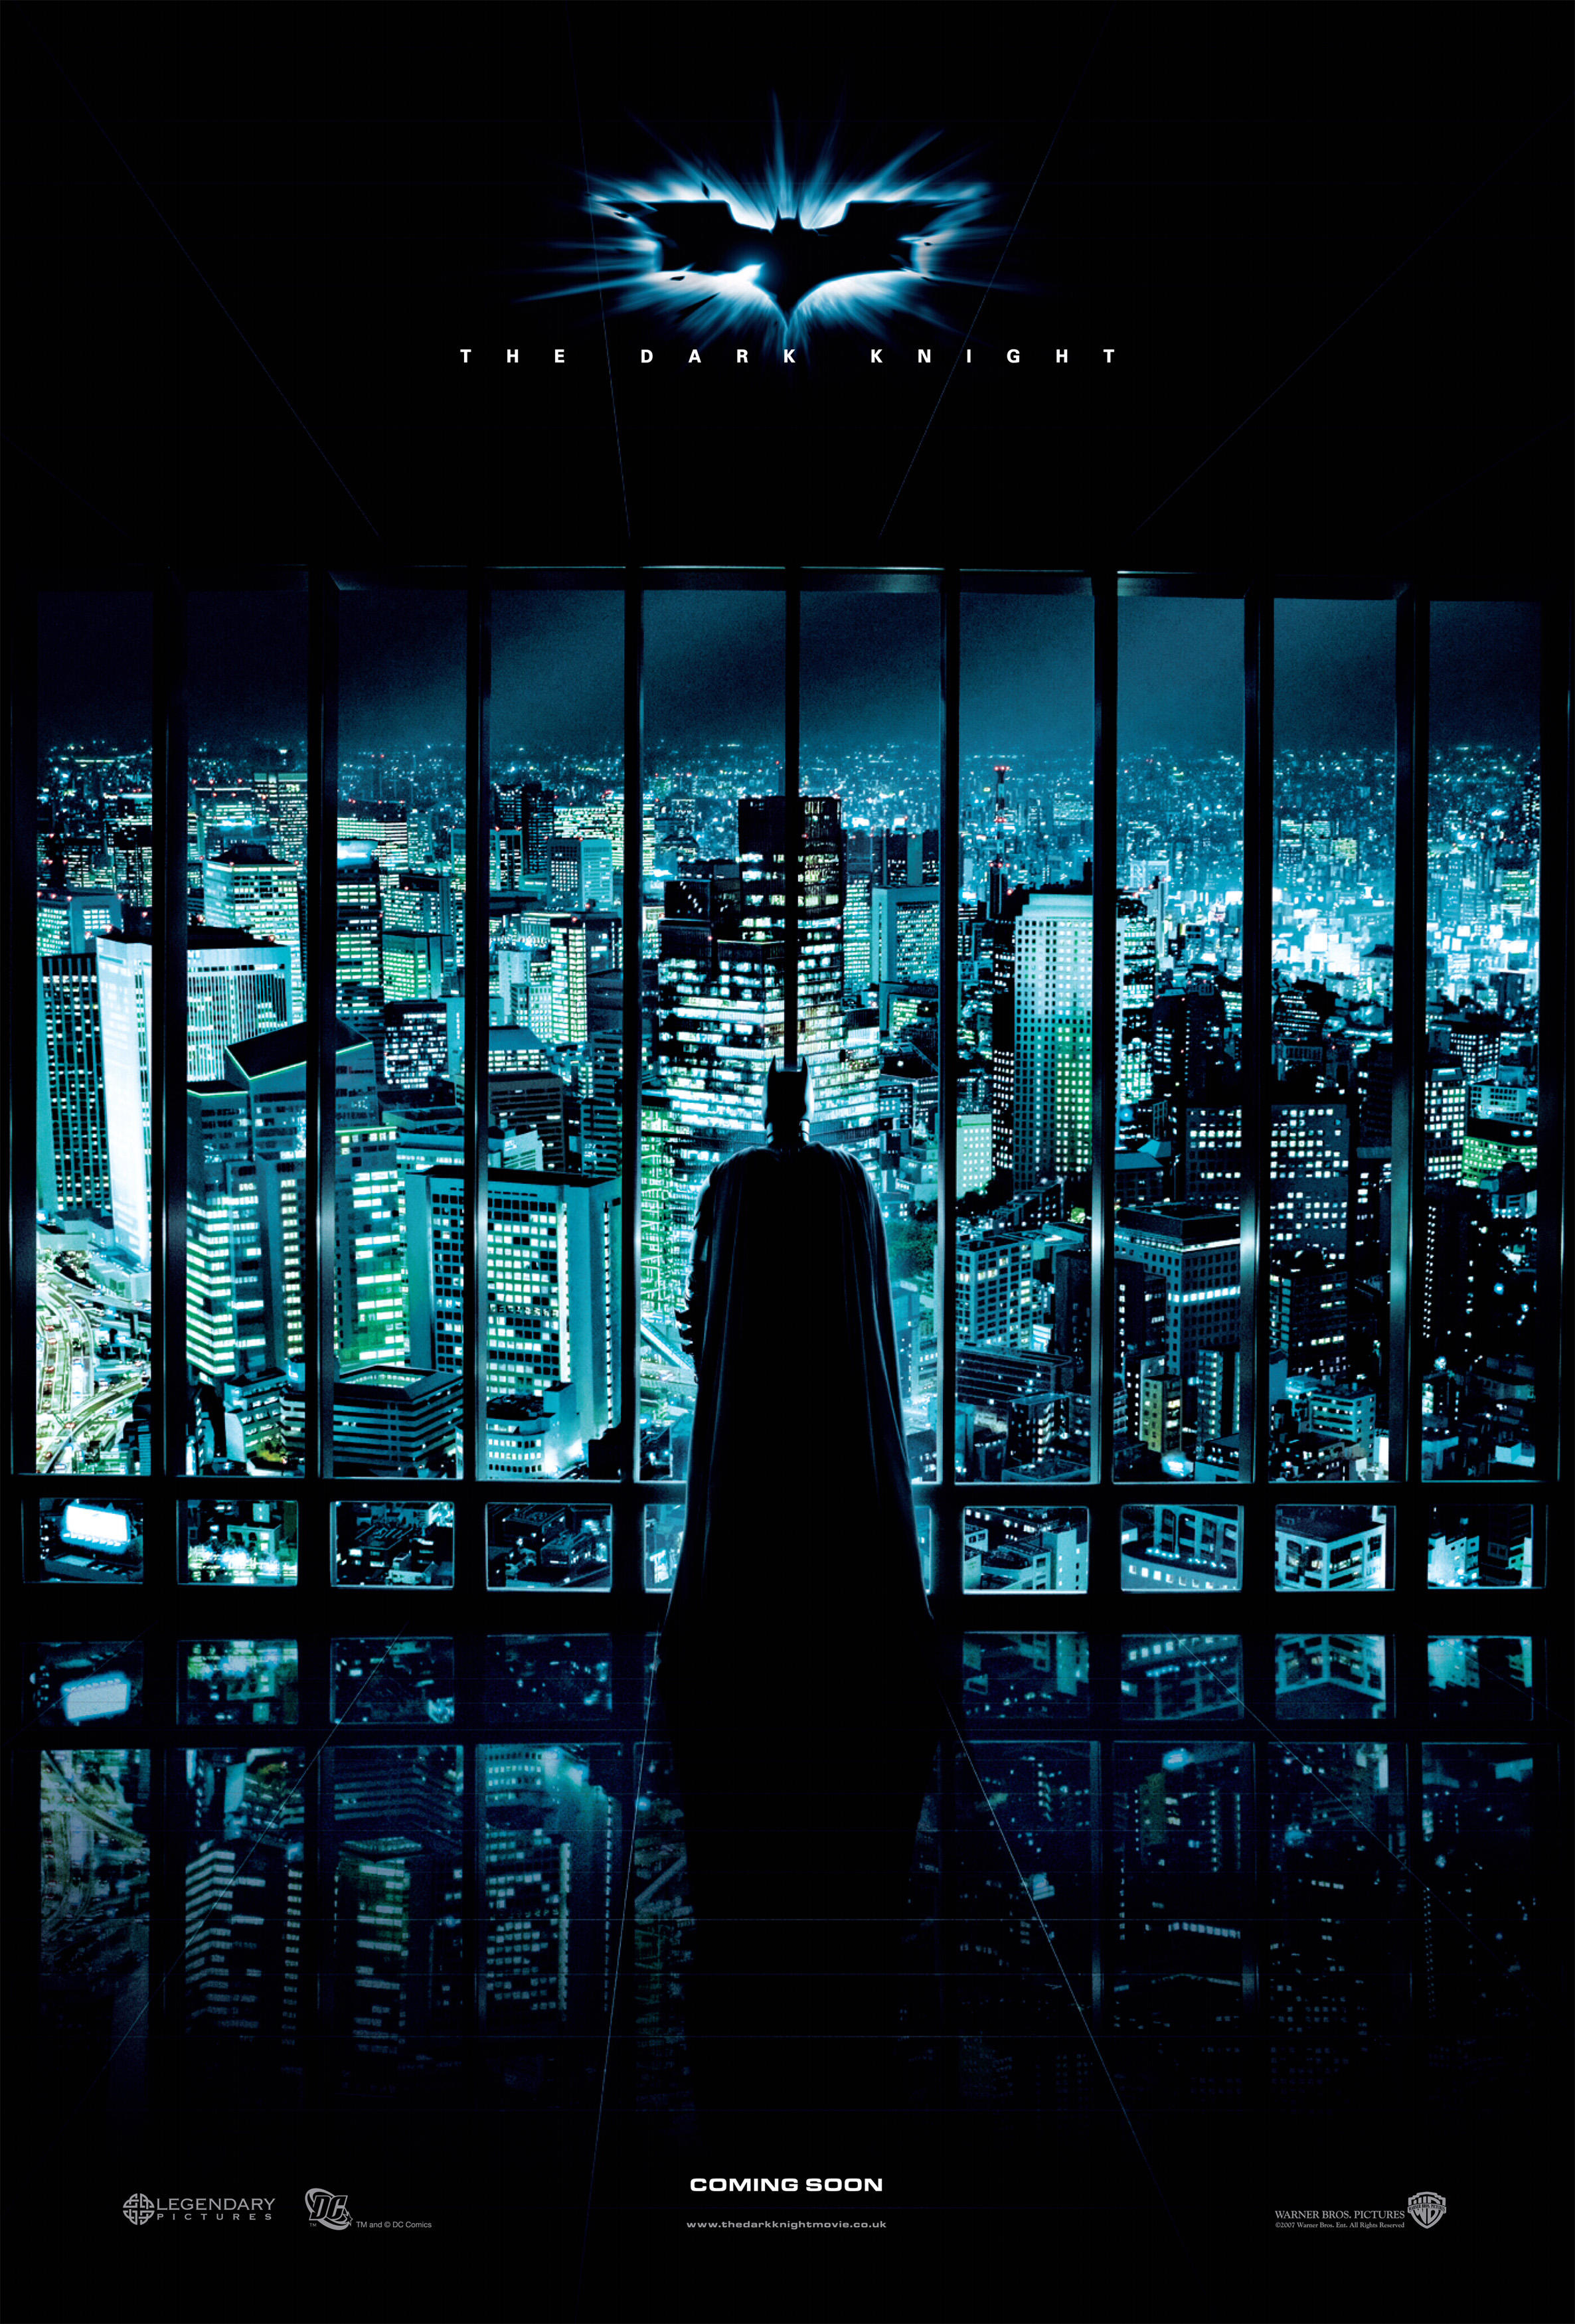 Batman stands staring at the city with his back to us, centered on The Dark Knight teaser movie poster.